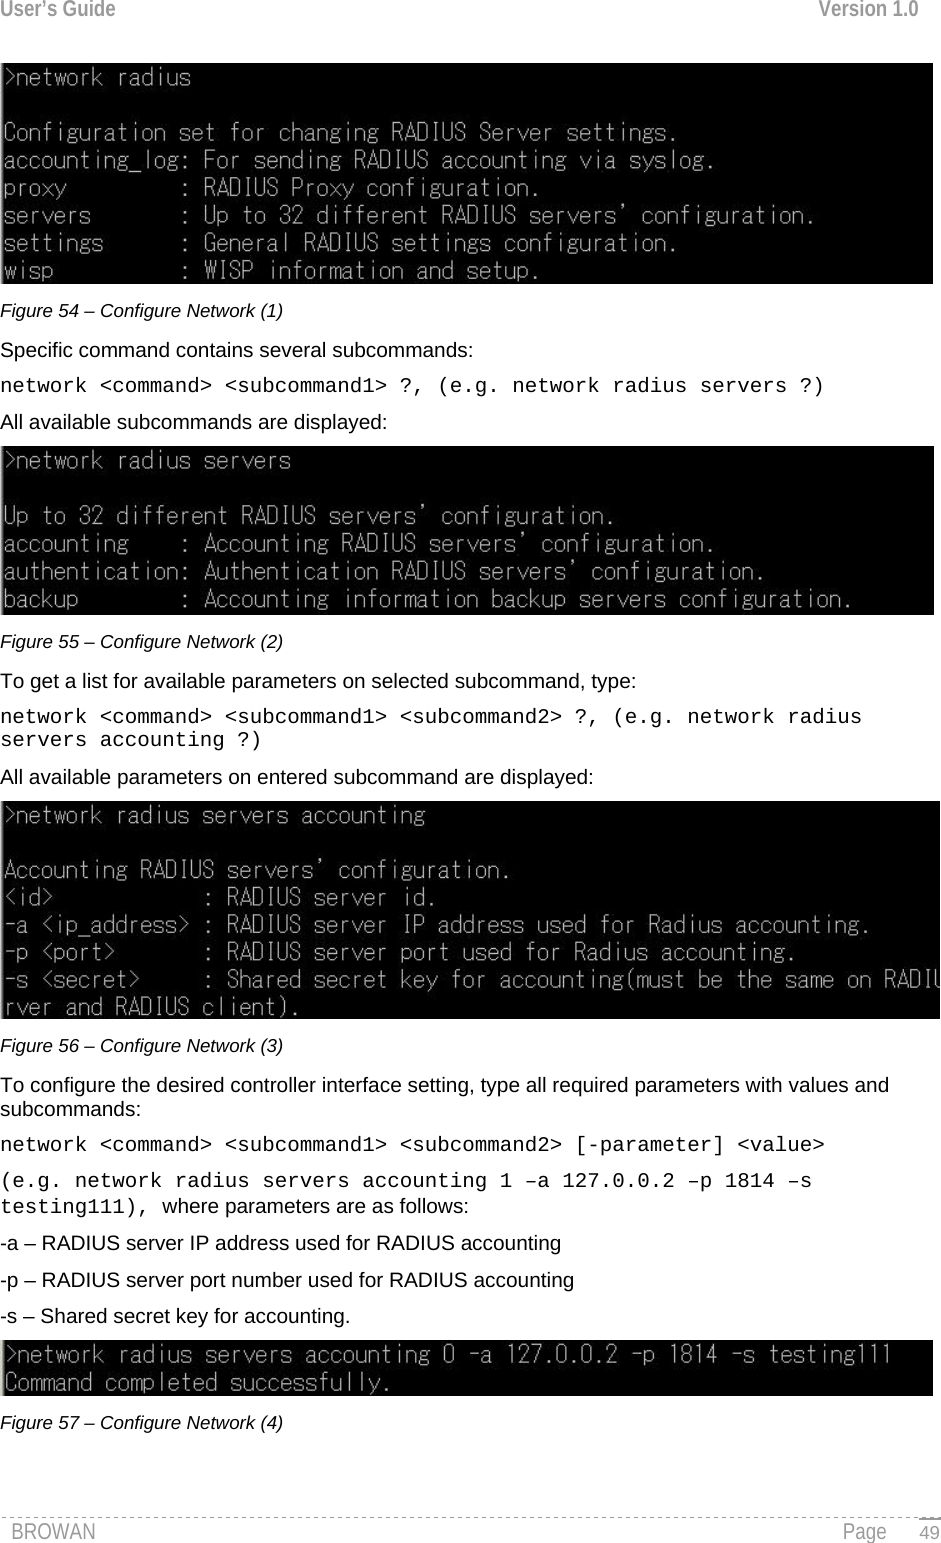 User’s Guide  Version 1.0   Figure 54 – Configure Network (1) Specific command contains several subcommands: network &lt;command&gt; &lt;subcommand1&gt; ?, (e.g. network radius servers ?) All available subcommands are displayed:  Figure 55 – Configure Network (2) To get a list for available parameters on selected subcommand, type: network &lt;command&gt; &lt;subcommand1&gt; &lt;subcommand2&gt; ?, (e.g. network radius servers accounting ?) All available parameters on entered subcommand are displayed:  Figure 56 – Configure Network (3) To configure the desired controller interface setting, type all required parameters with values and subcommands: network &lt;command&gt; &lt;subcommand1&gt; &lt;subcommand2&gt; [-parameter] &lt;value&gt;  (e.g. network radius servers accounting 1 –a 127.0.0.2 –p 1814 –s testing111), where parameters are as follows: -a – RADIUS server IP address used for RADIUS accounting -p – RADIUS server port number used for RADIUS accounting -s – Shared secret key for accounting.  Figure 57 – Configure Network (4) BROWAN                                                                                                                                               Page   49